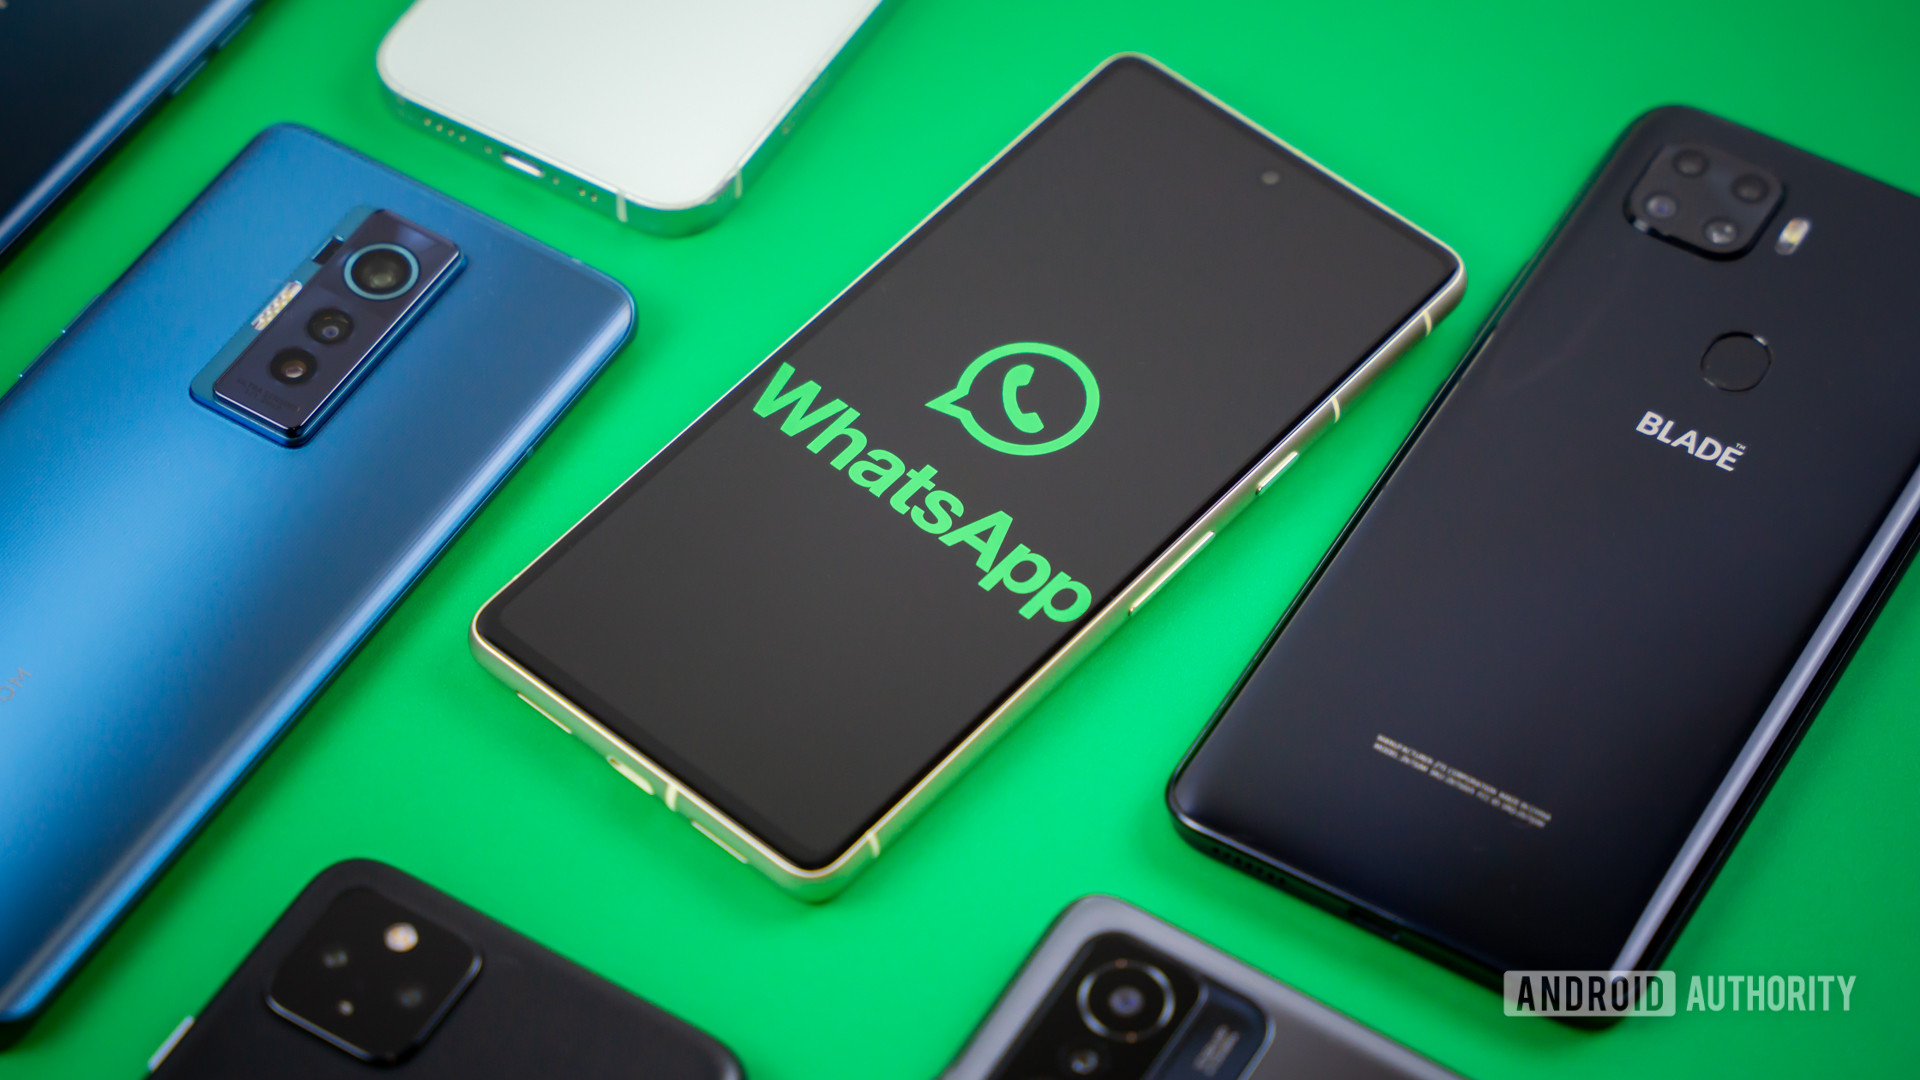 WhatsApp logo on smartphone next to other devices Stock photo 3 - VoIP Android calls